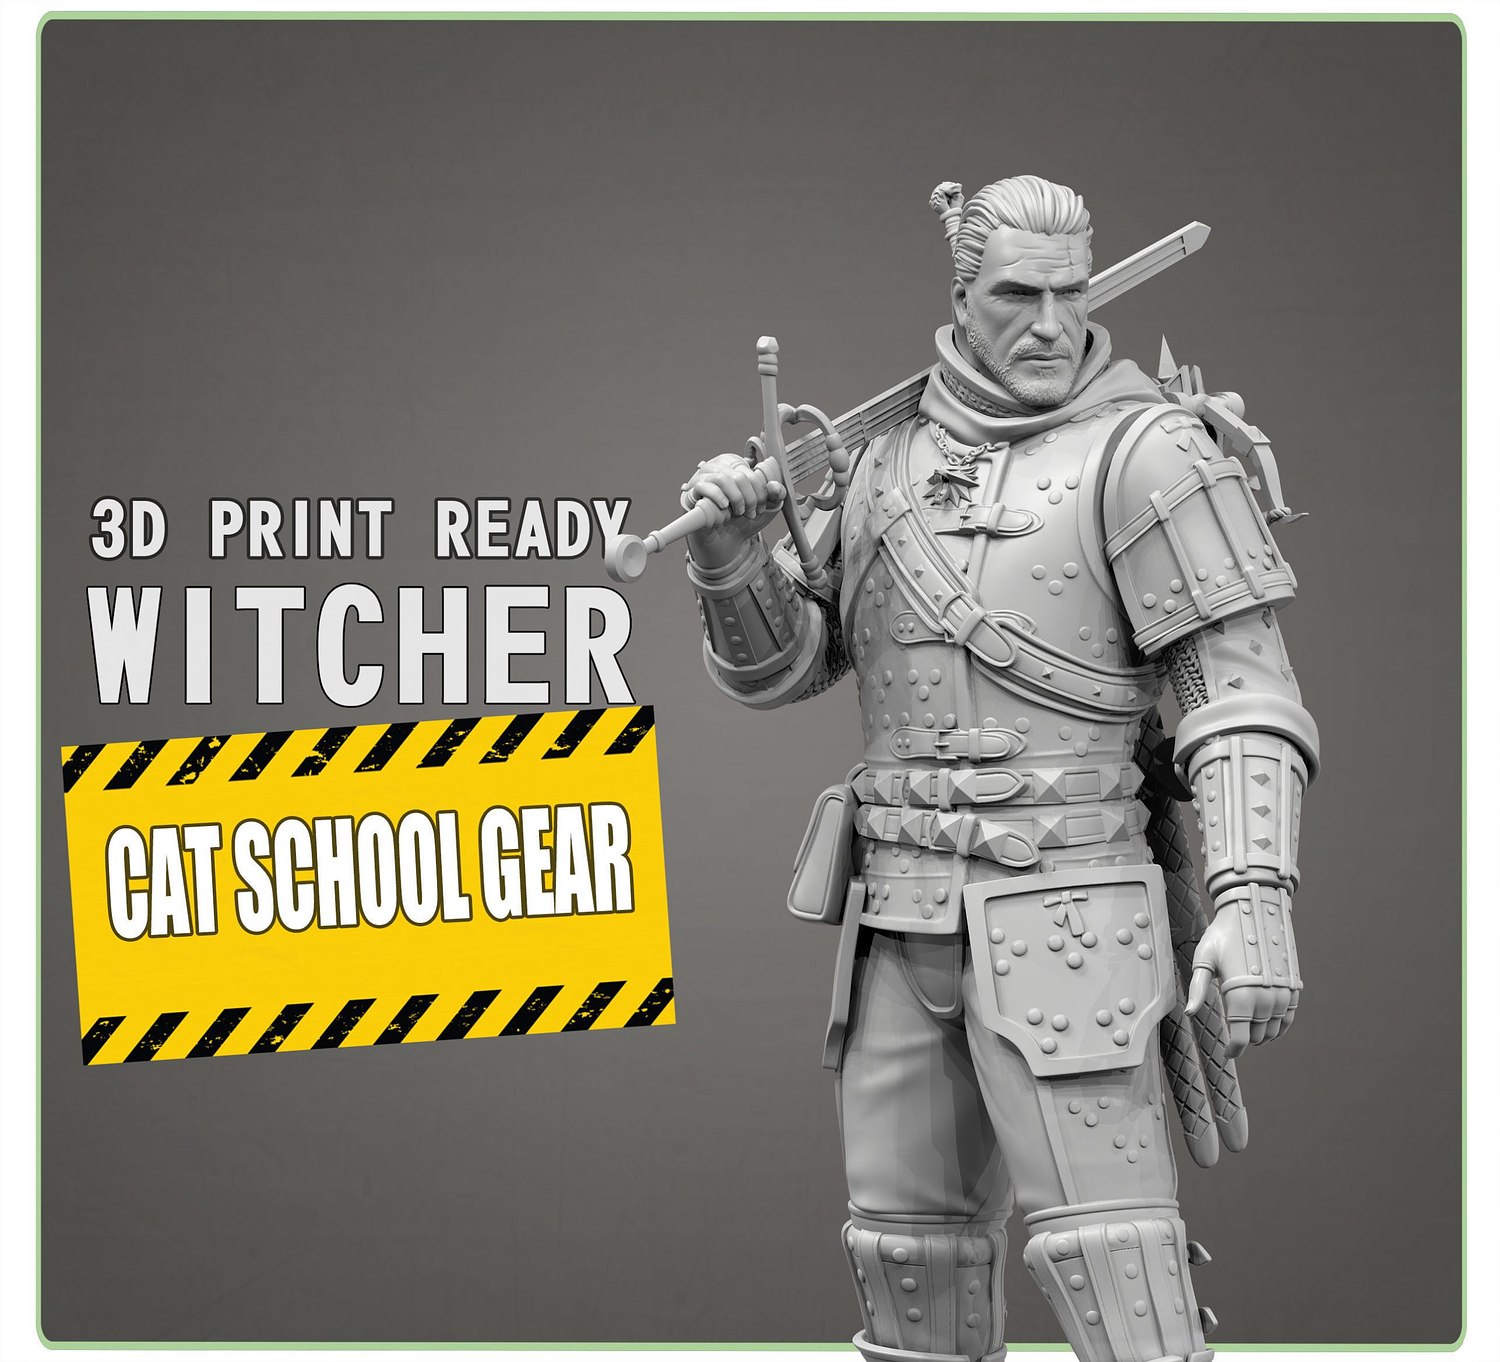 Geralt of Rivia - Cat School Gear from The Witcher